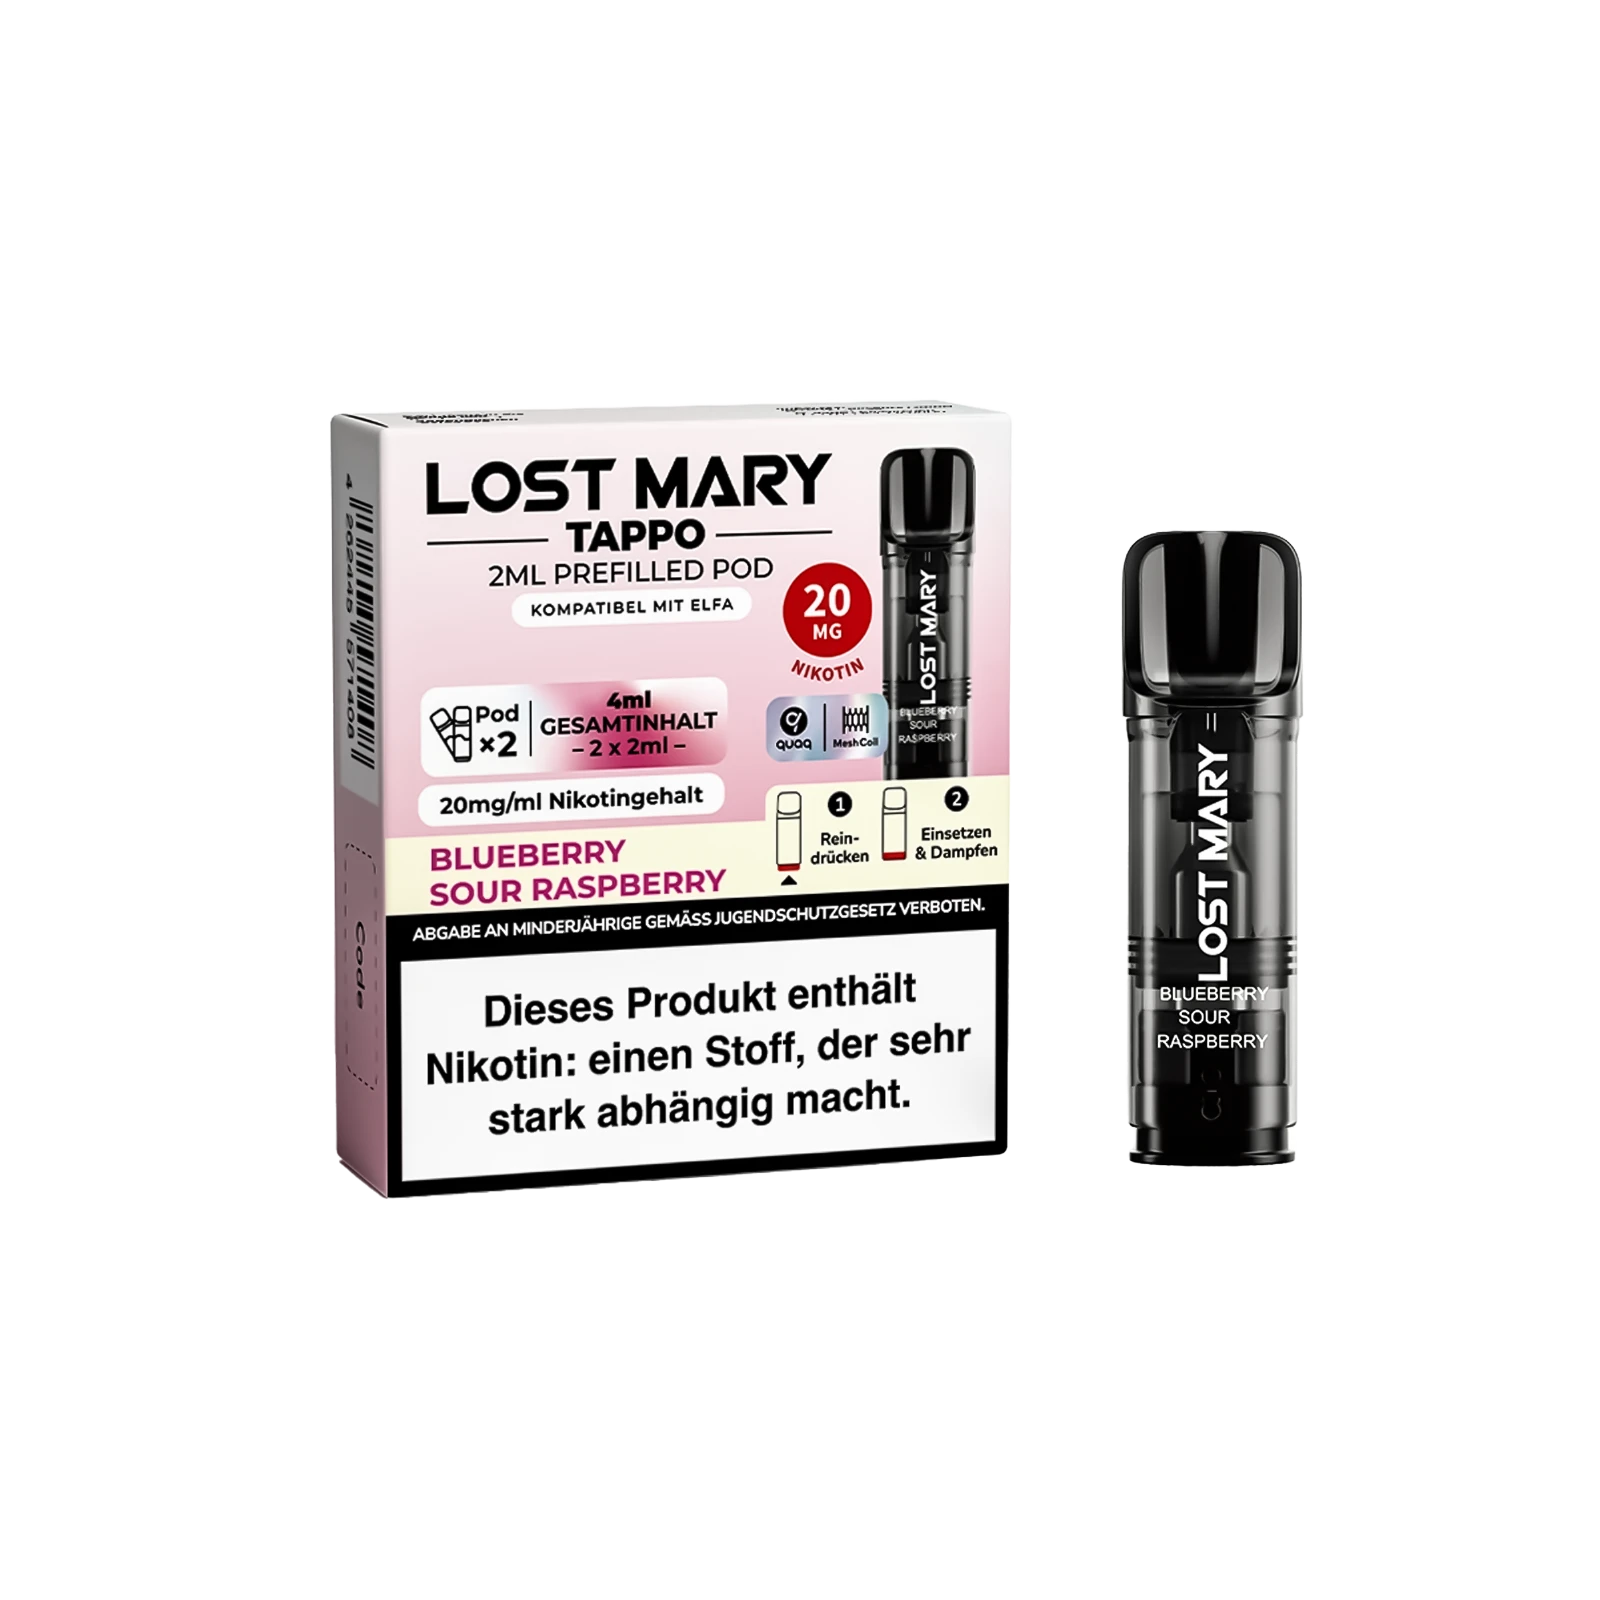 Lost Mary Tappo Blueberry Sour Raspberry : Umweltfreundliches Pod-System mit Prefilled Pods 2